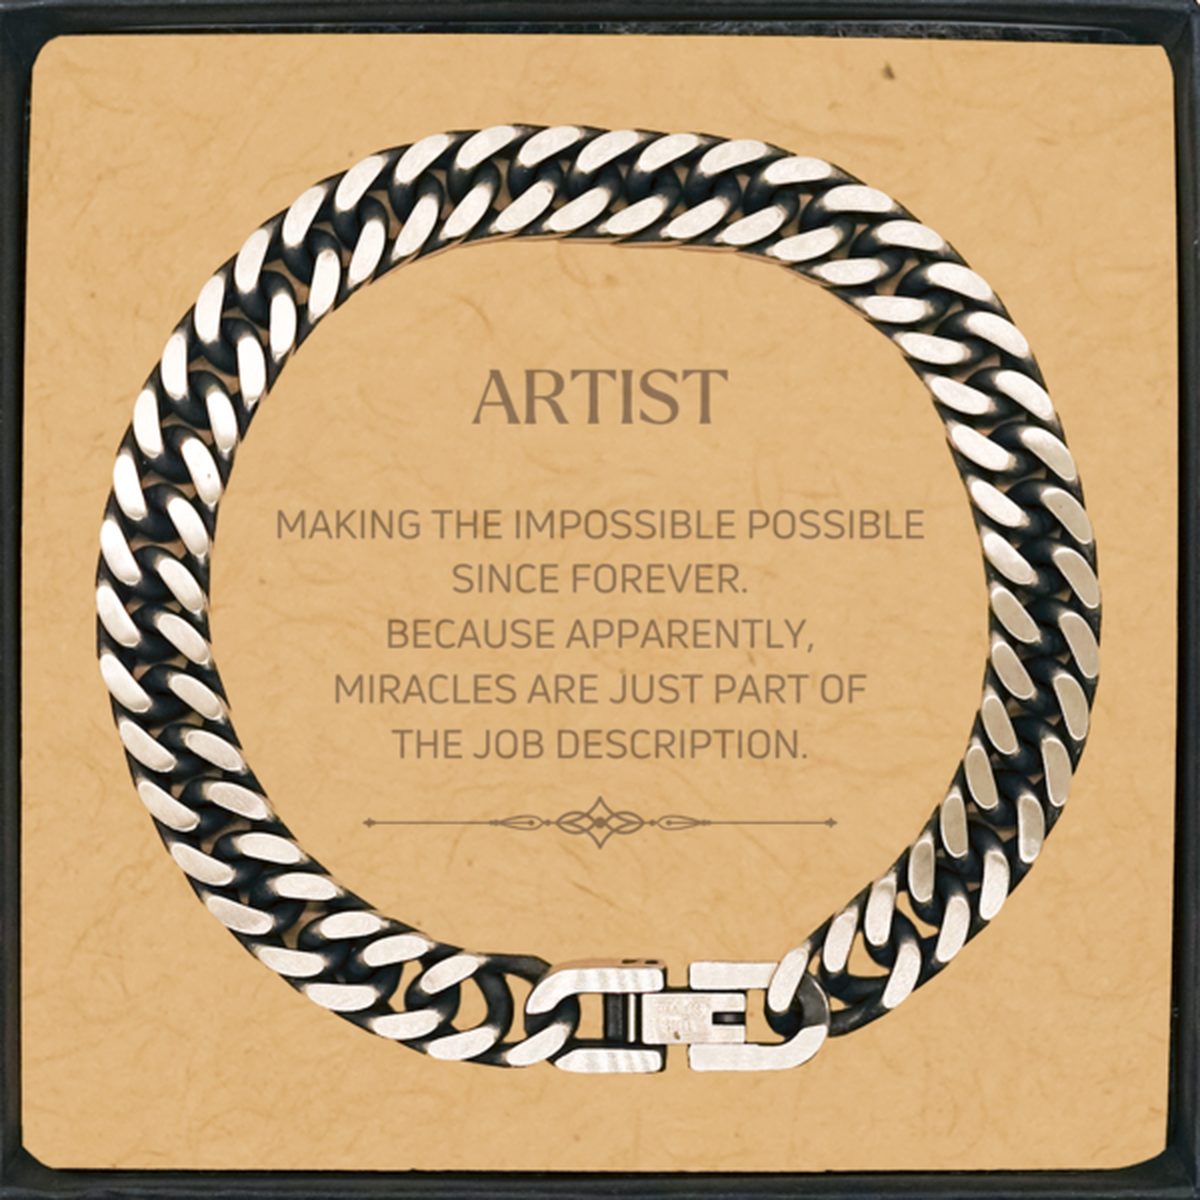 Funny Artist Gifts, Miracles are just part of the job description, Inspirational Birthday Cuban Link Chain Bracelet For Artist, Men, Women, Coworkers, Friends, Boss